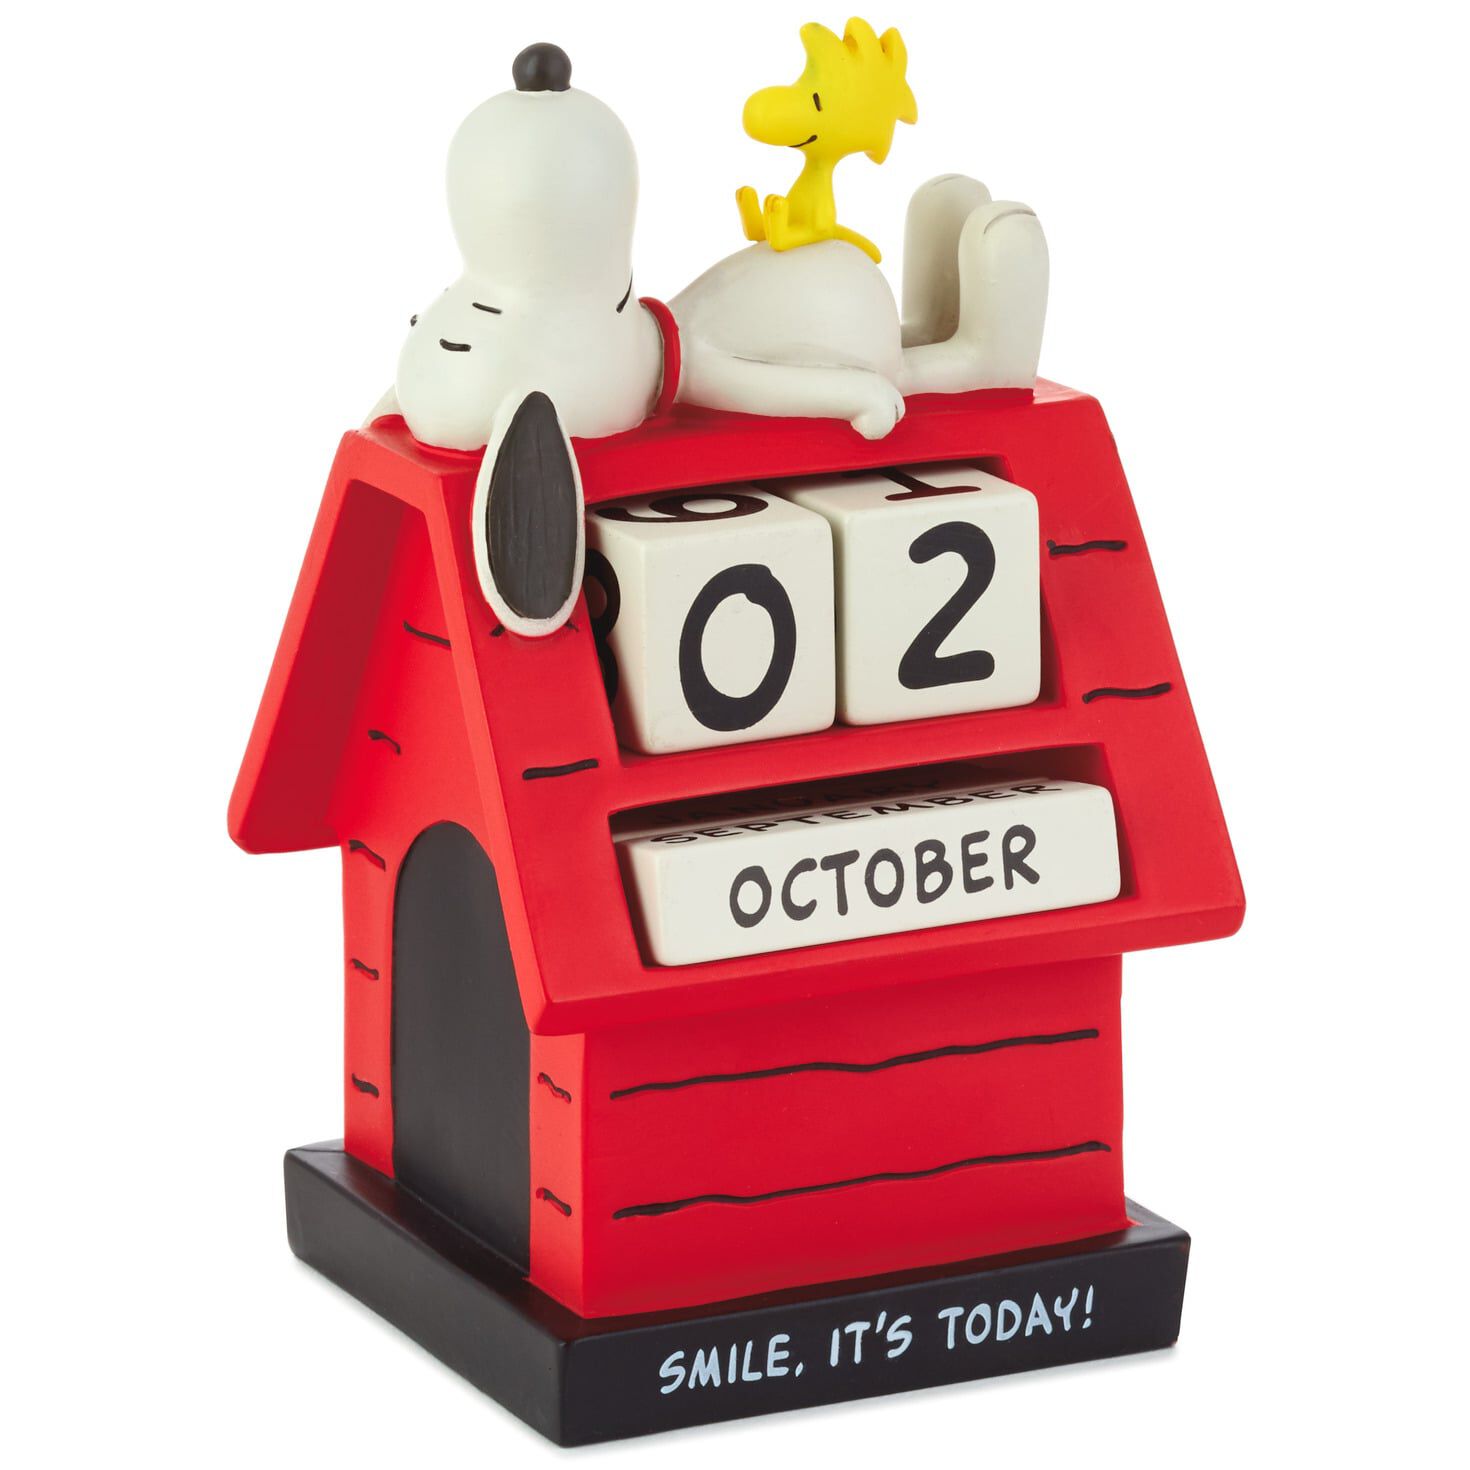 Details about   HALLMARK PEANUTS SNOOPY’S DOGHOUSE CARD HOLDER WITH 16 HOLIDAY CARDS NEW CUTE 